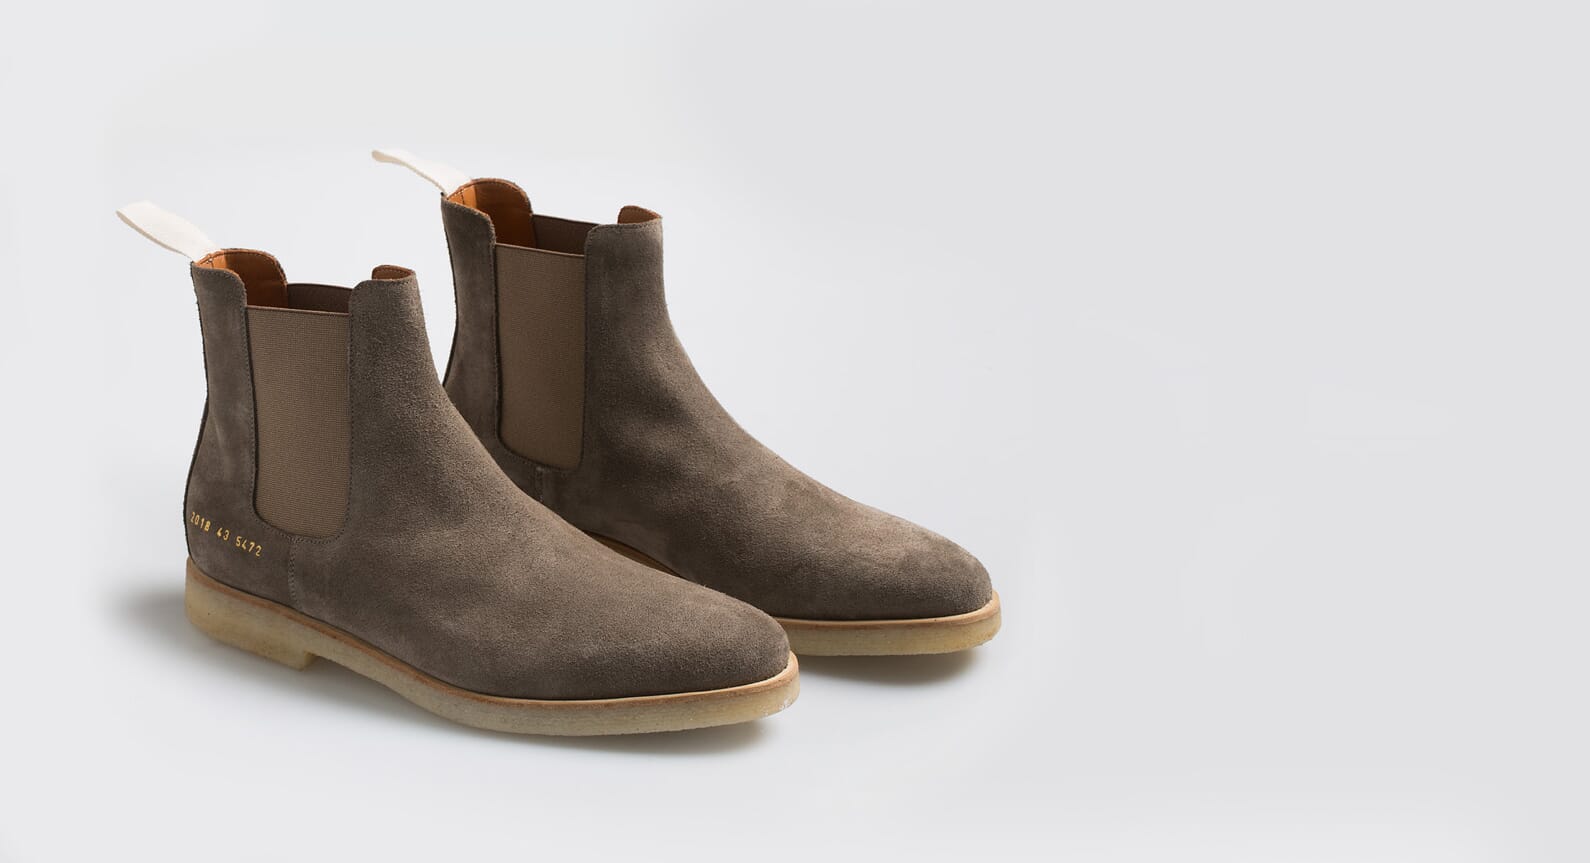 Imagination Højttaler Penneven Common Projects Chelsea Boots Black Online Sale, UP TO 62% OFF